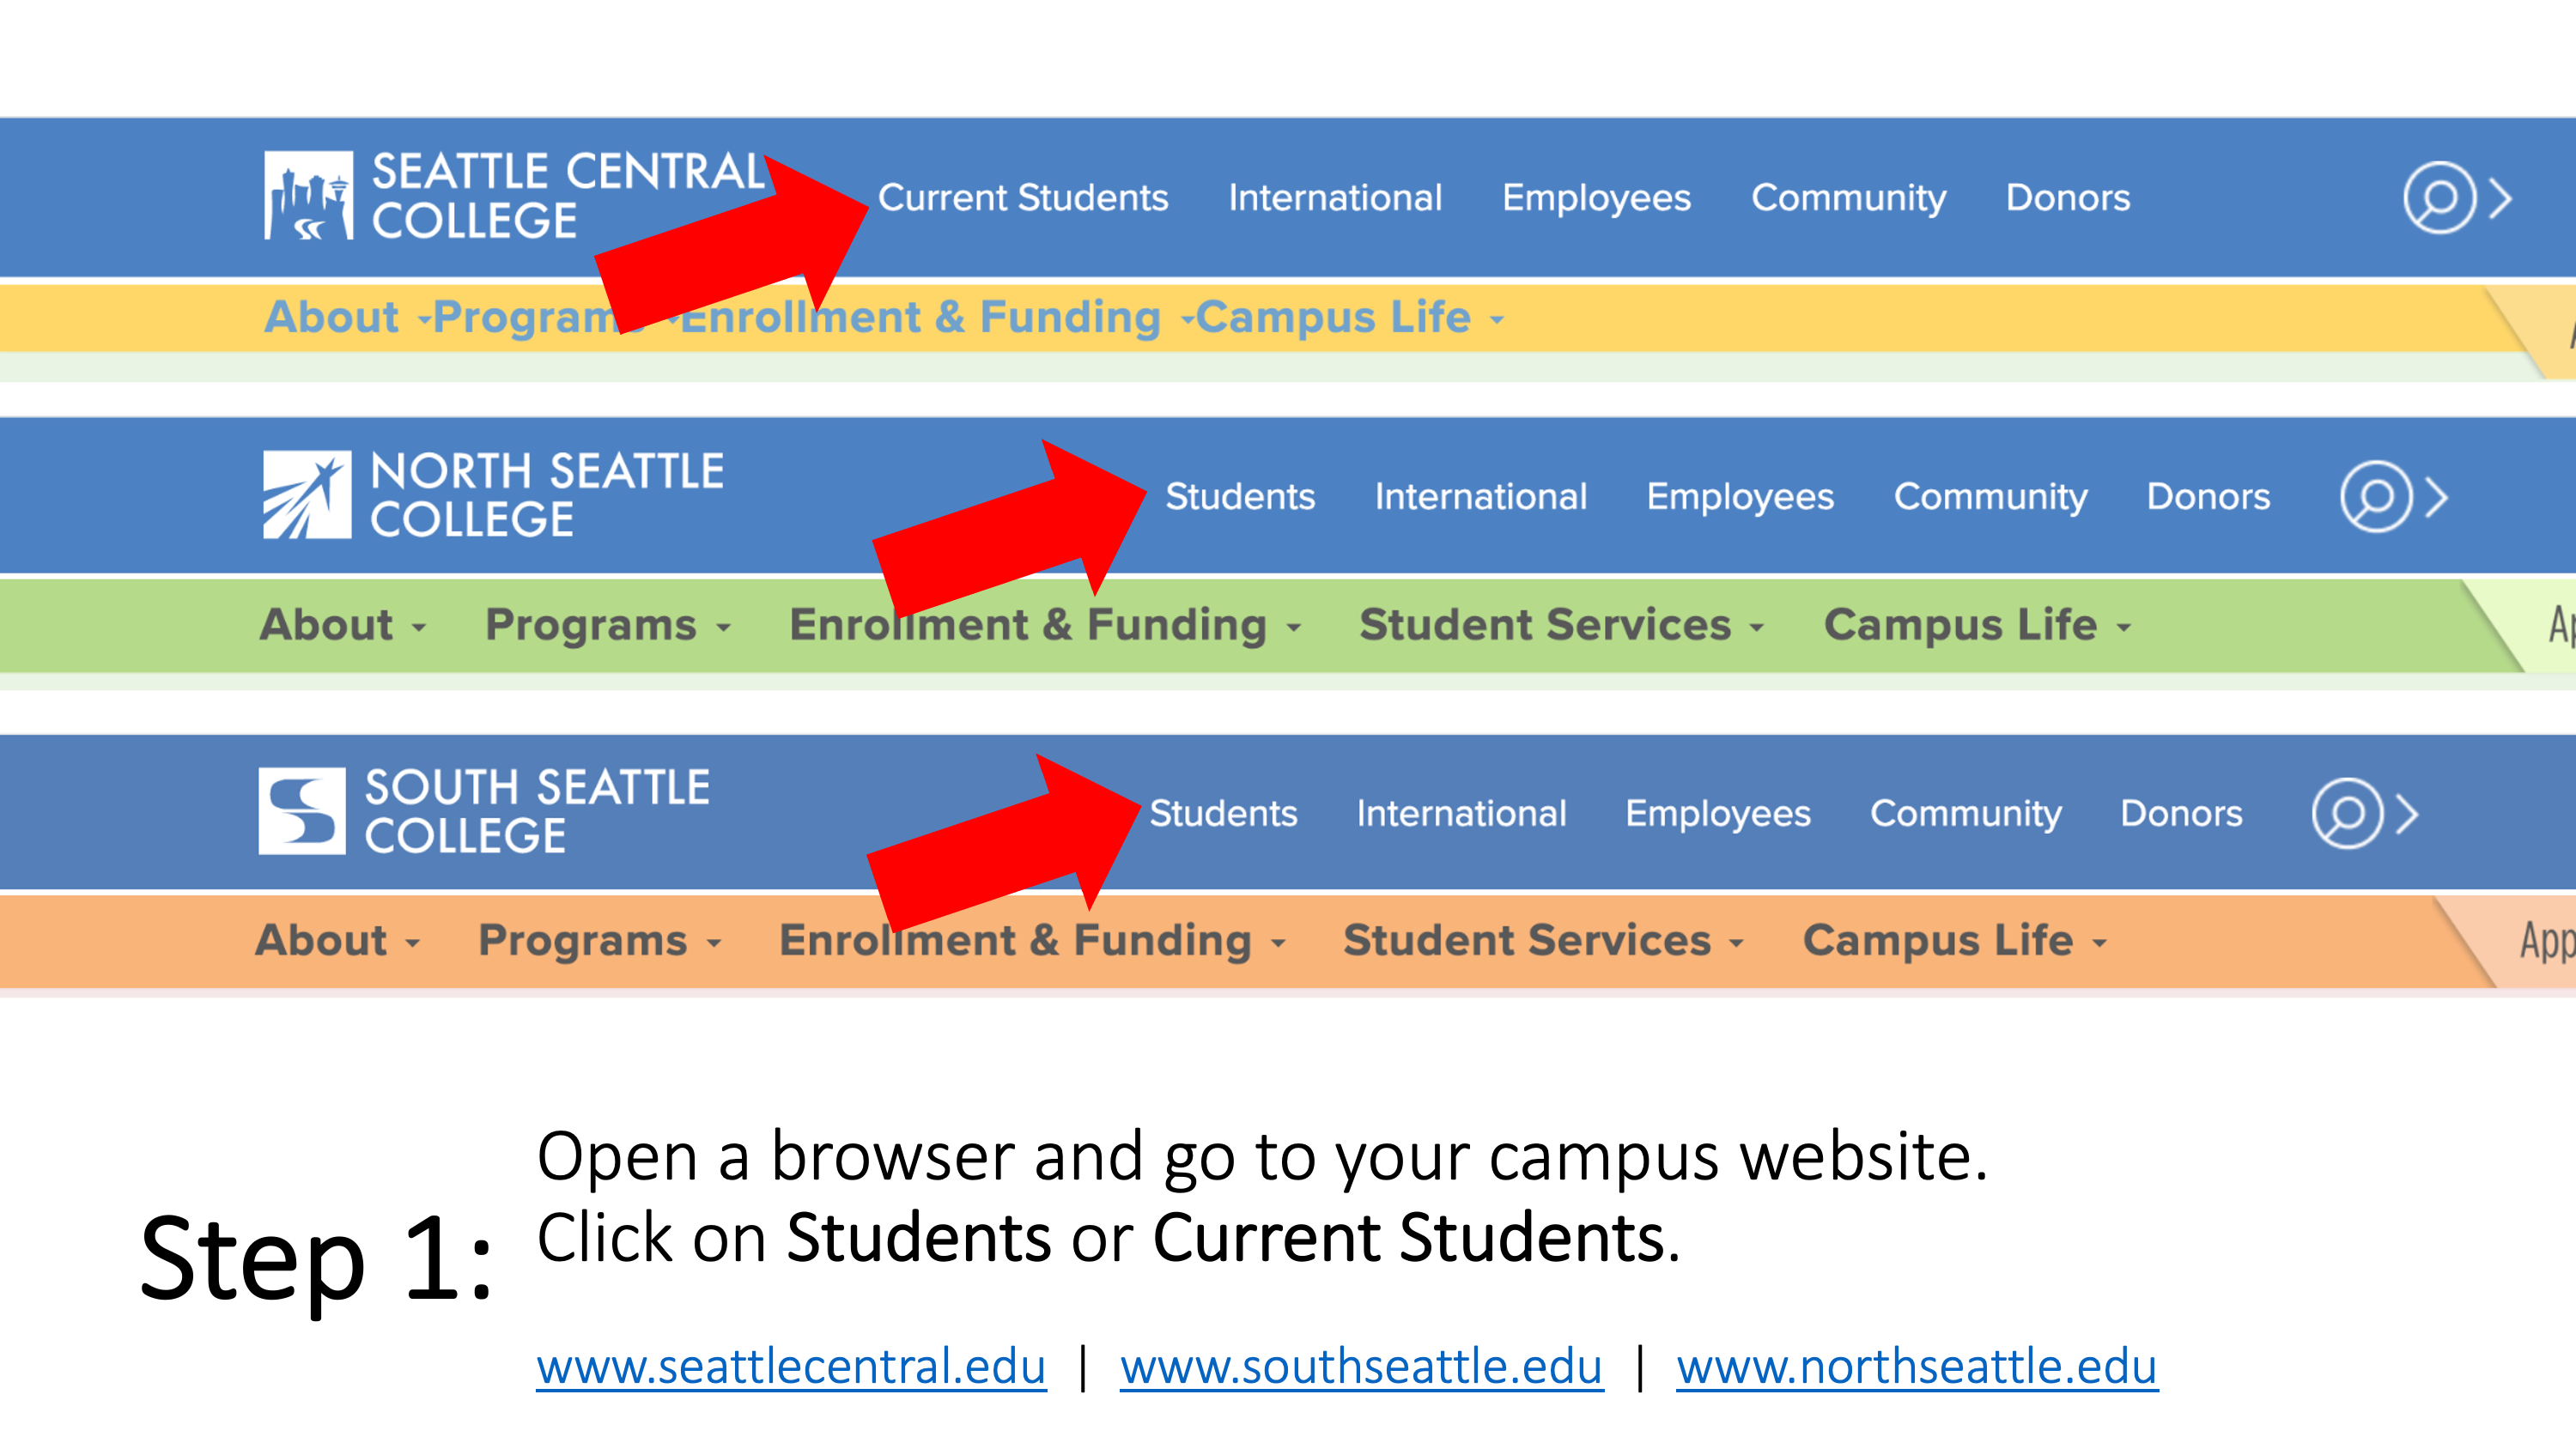 Step 1: Open a browser and go to your campus website.  Click on Students or Current Students. www.seattlecentral.edu , www.southseattle.edu , or www.northseattle.edu.